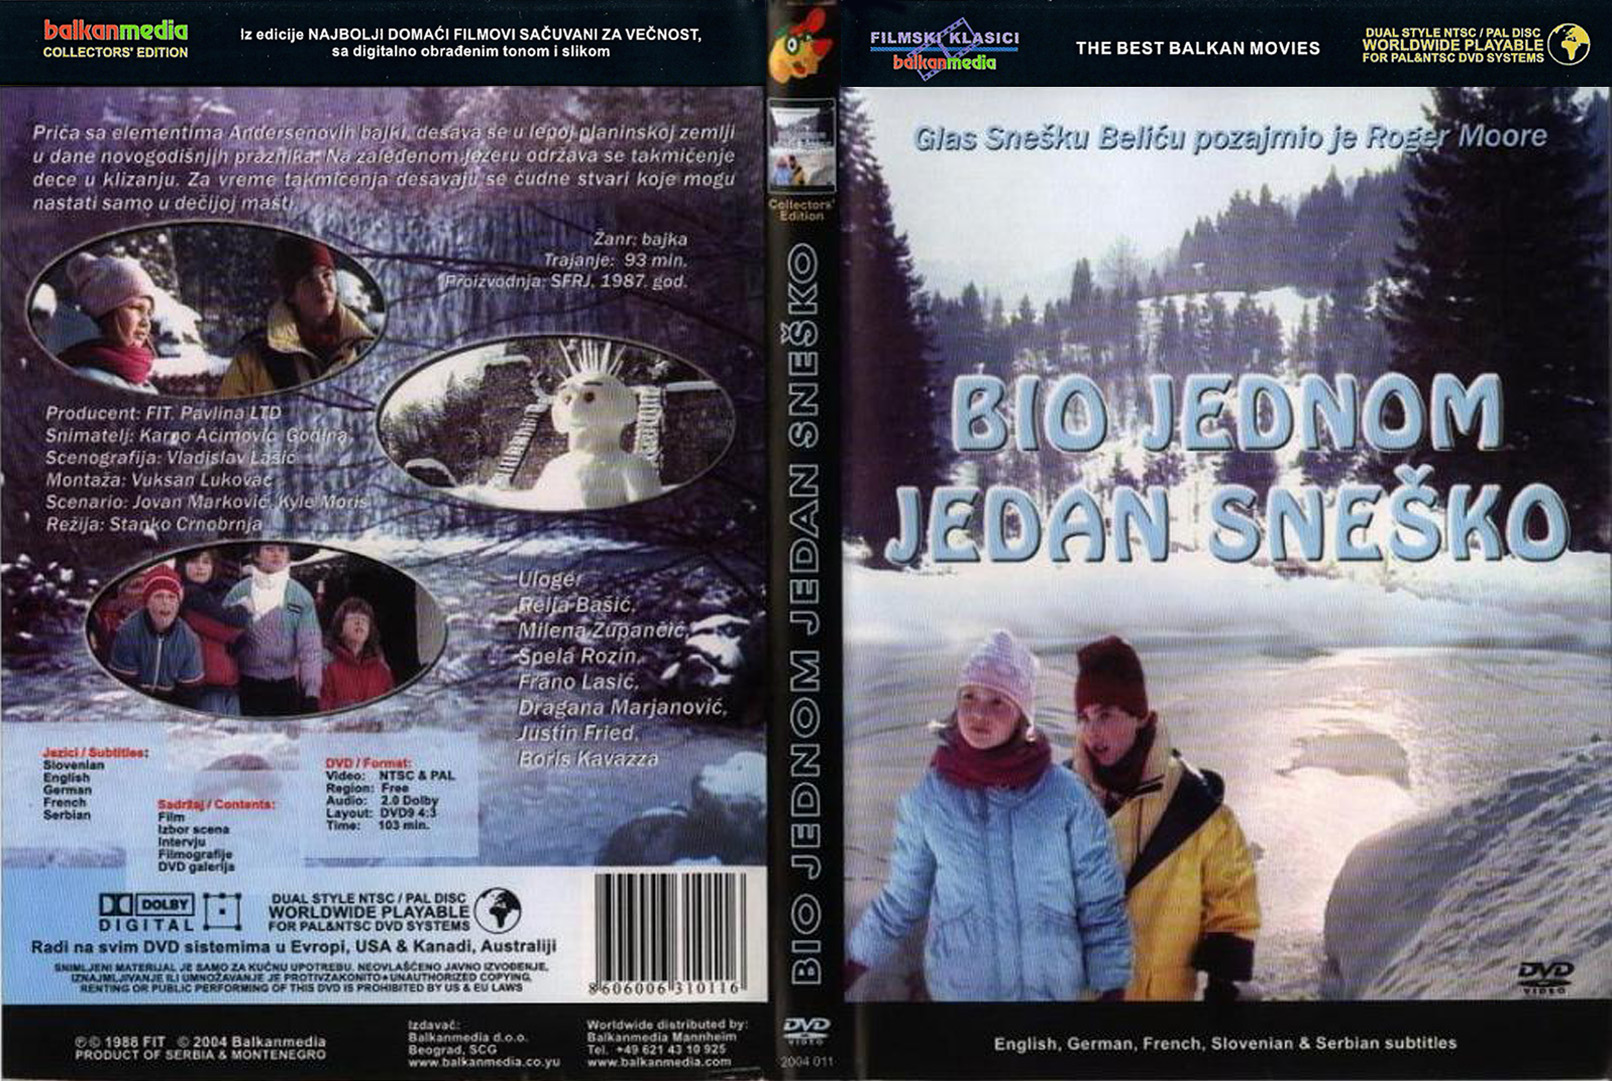 Click to view full size image -  DVD Cover - B - DVD - BIO JEDNOM JEDAN SNESKO - DVD - BIO JEDNOM JEDAN SNESKO.jpg